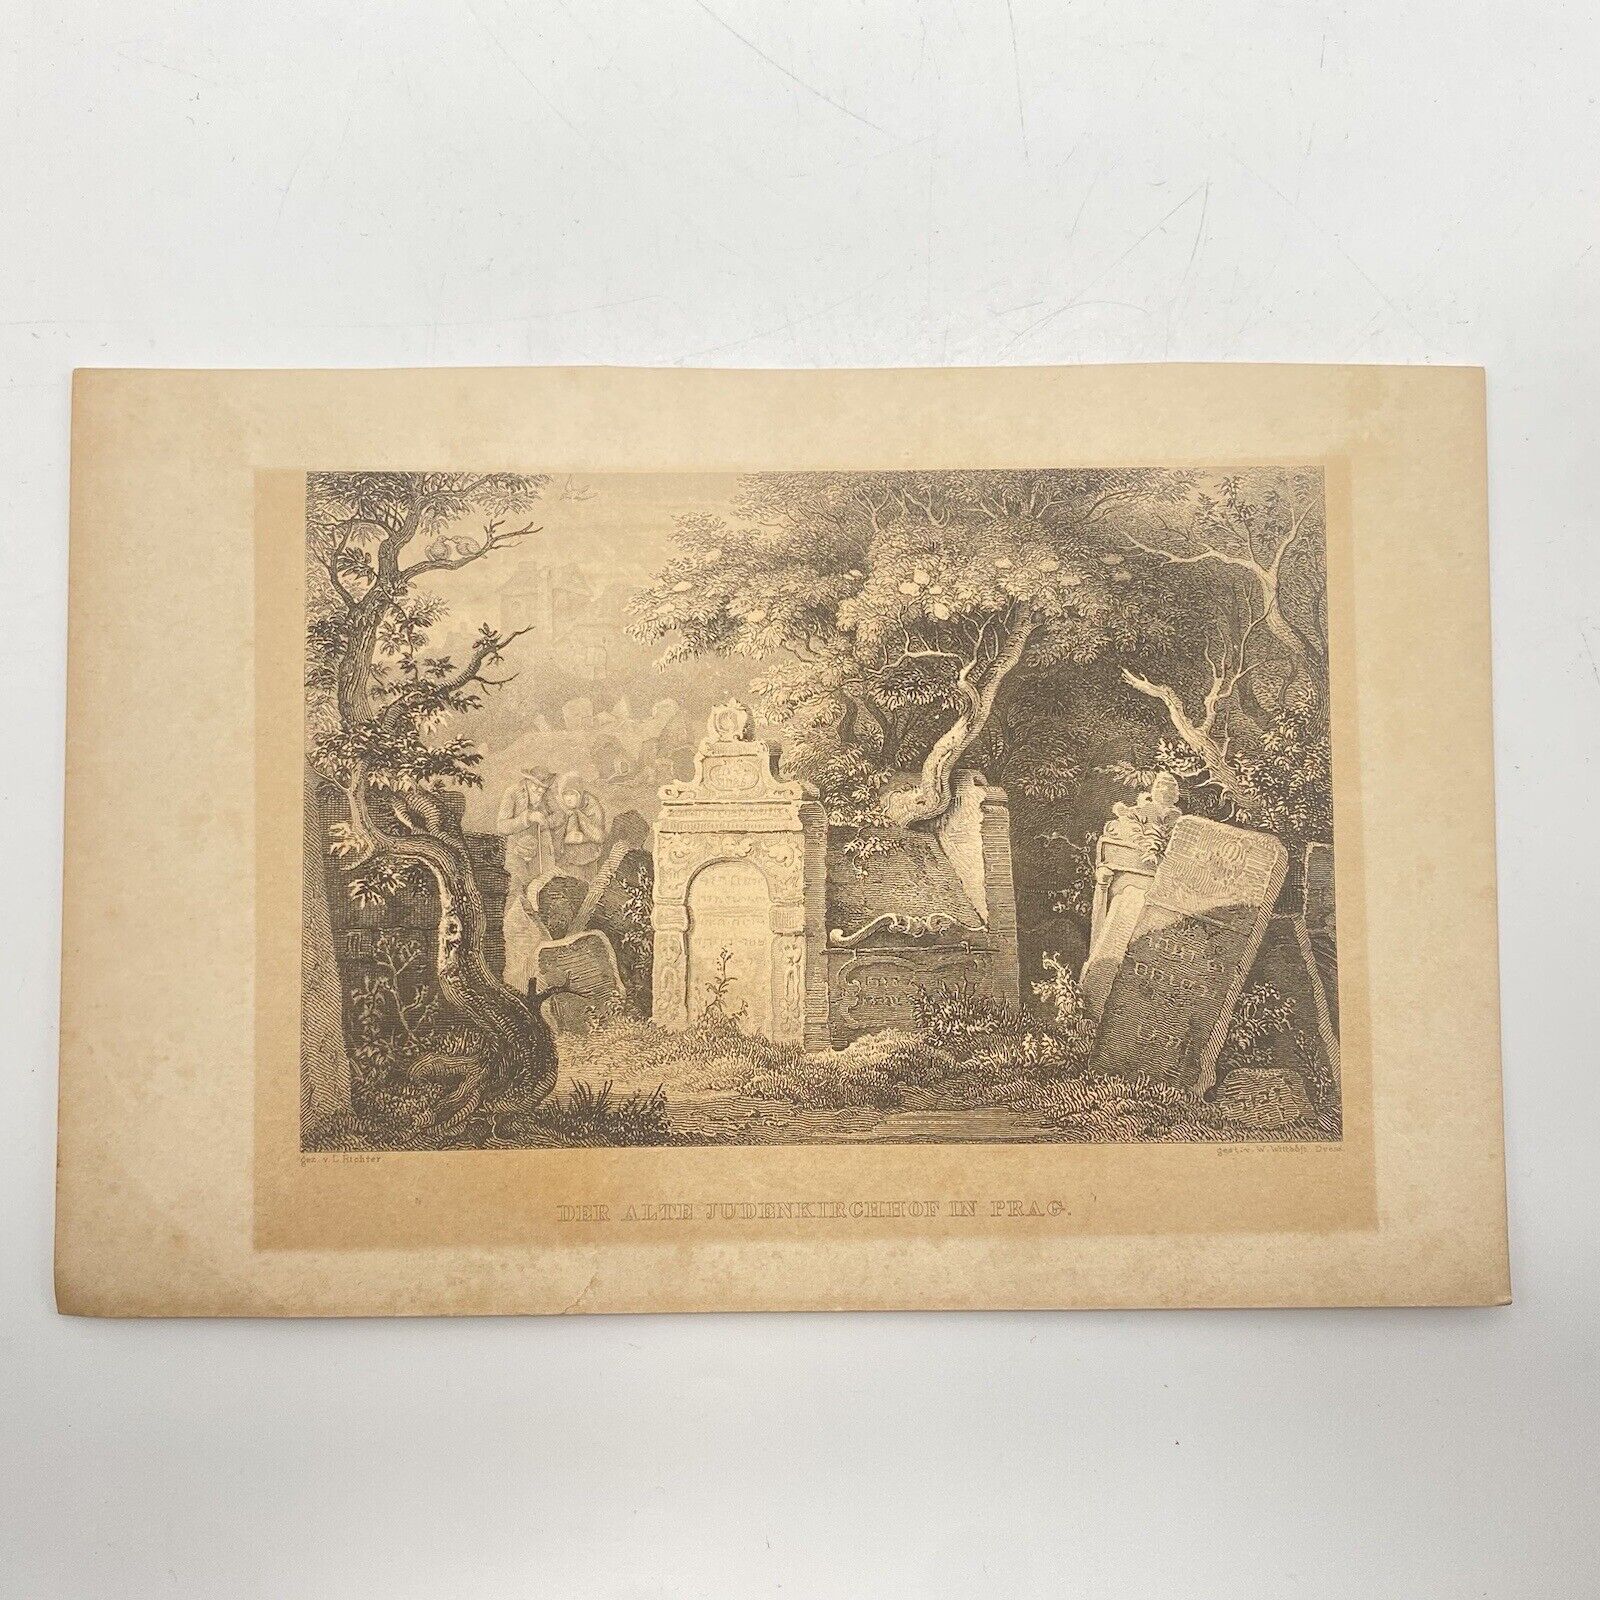 Judaica: Antique 1841 Steel Engraving The Old Jewish Cemetery of Prague